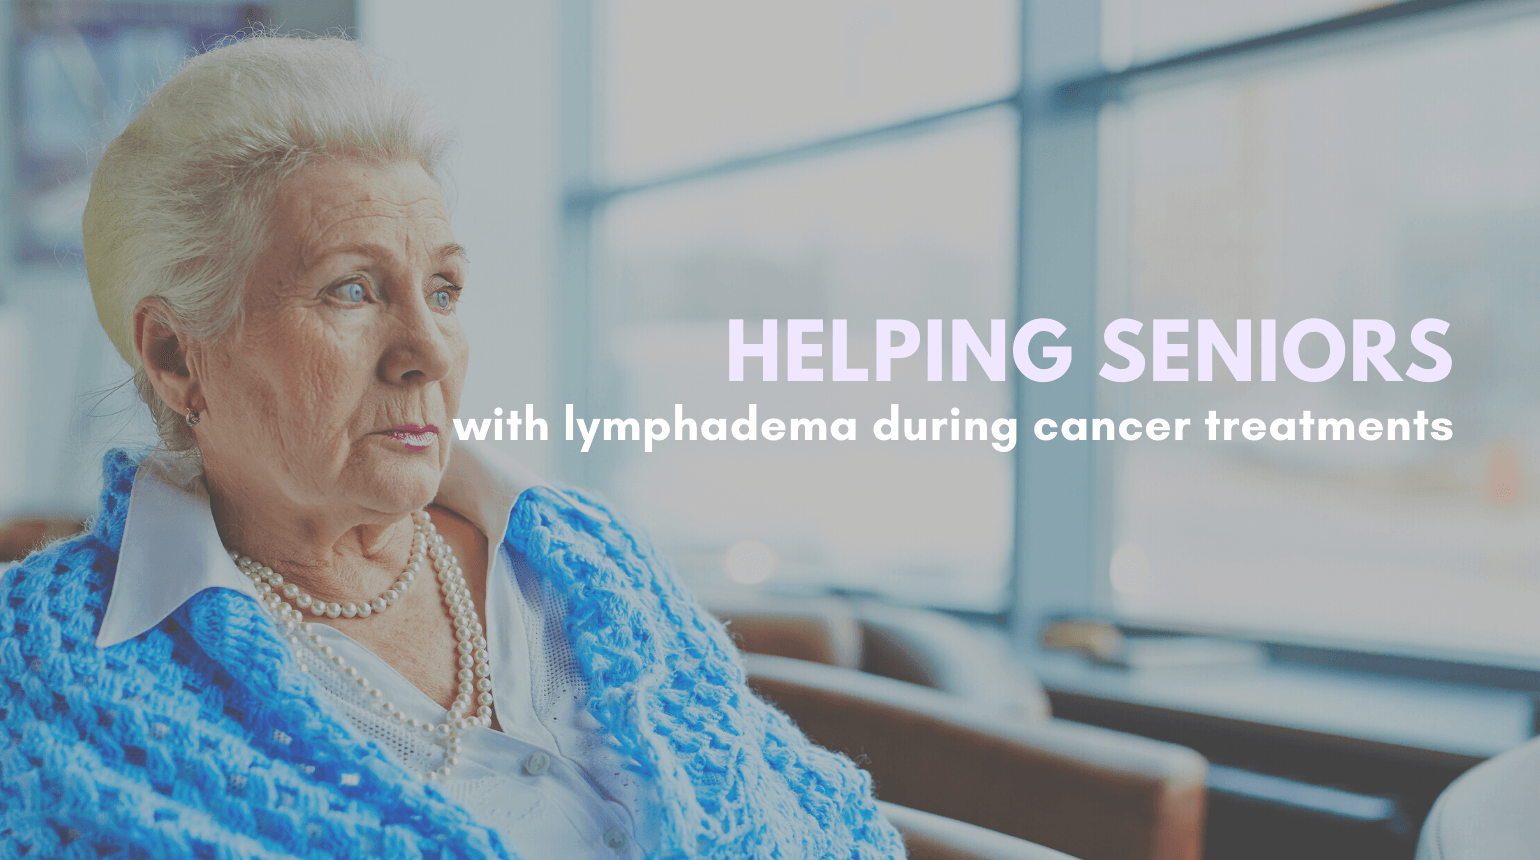 Lymphadema During Cancer Treatments in Seniors